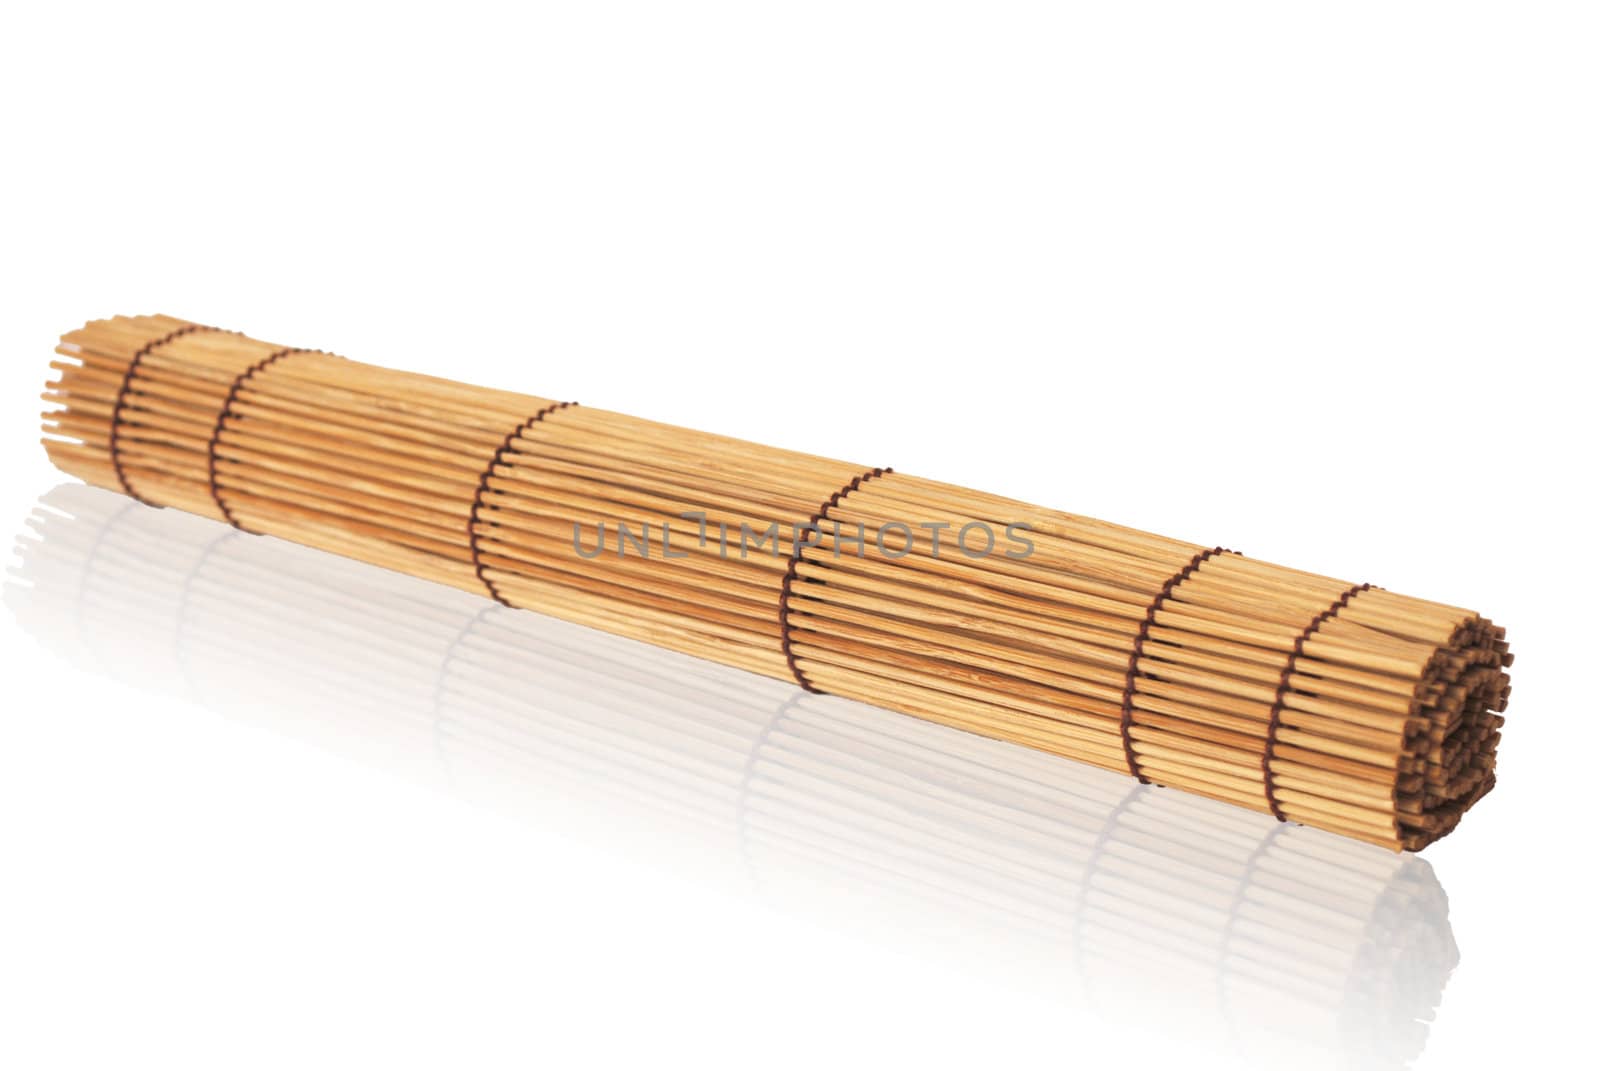 rolled bamboo mat on a white background                